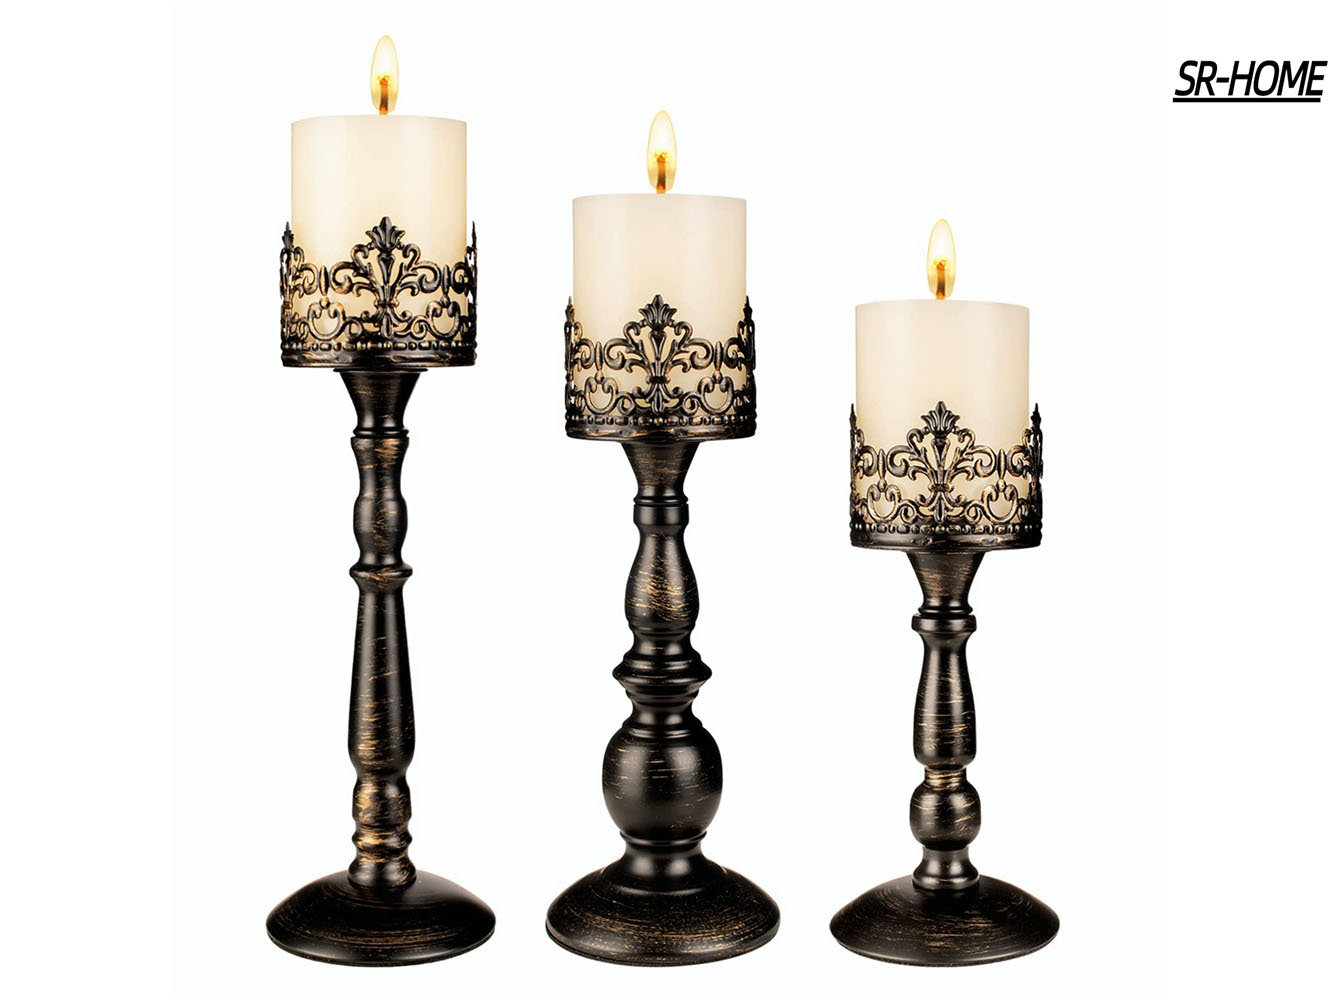 5 Arms Candelabra, 10.4 Inch Tall Black Candlestick Holder, Gothic